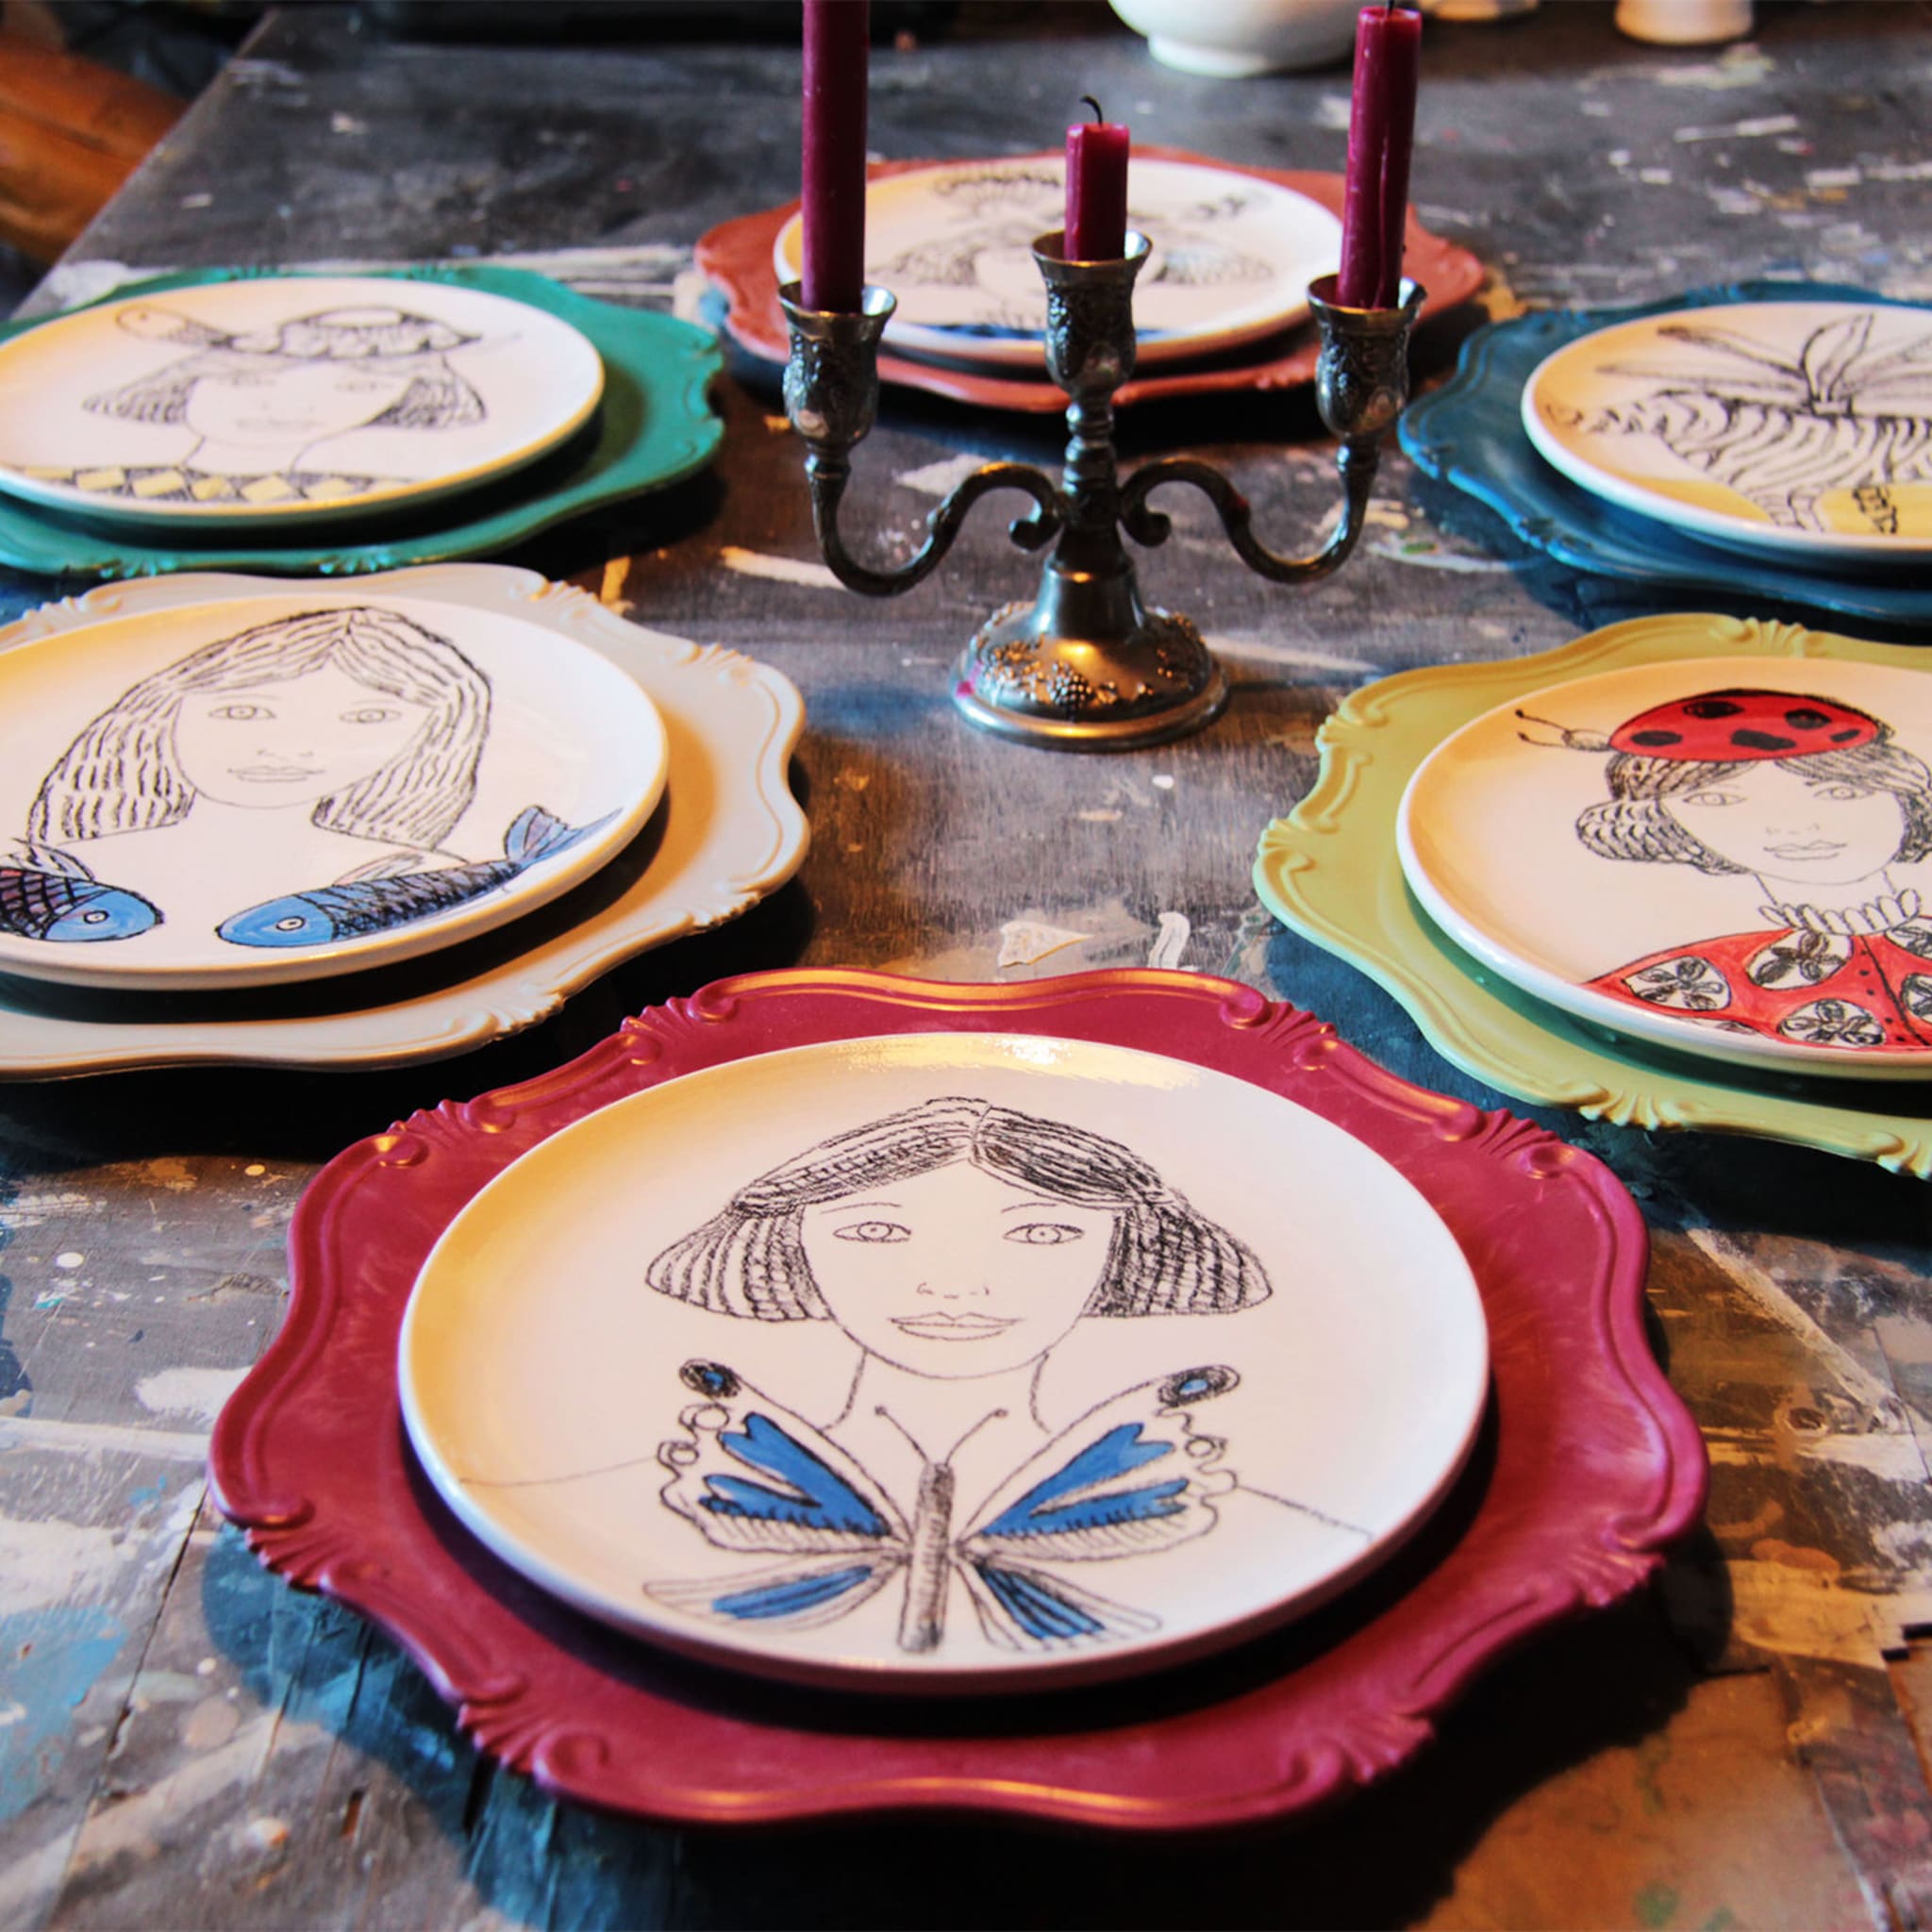 Woman with Butterfly Decorative Plate - Alternative view 3